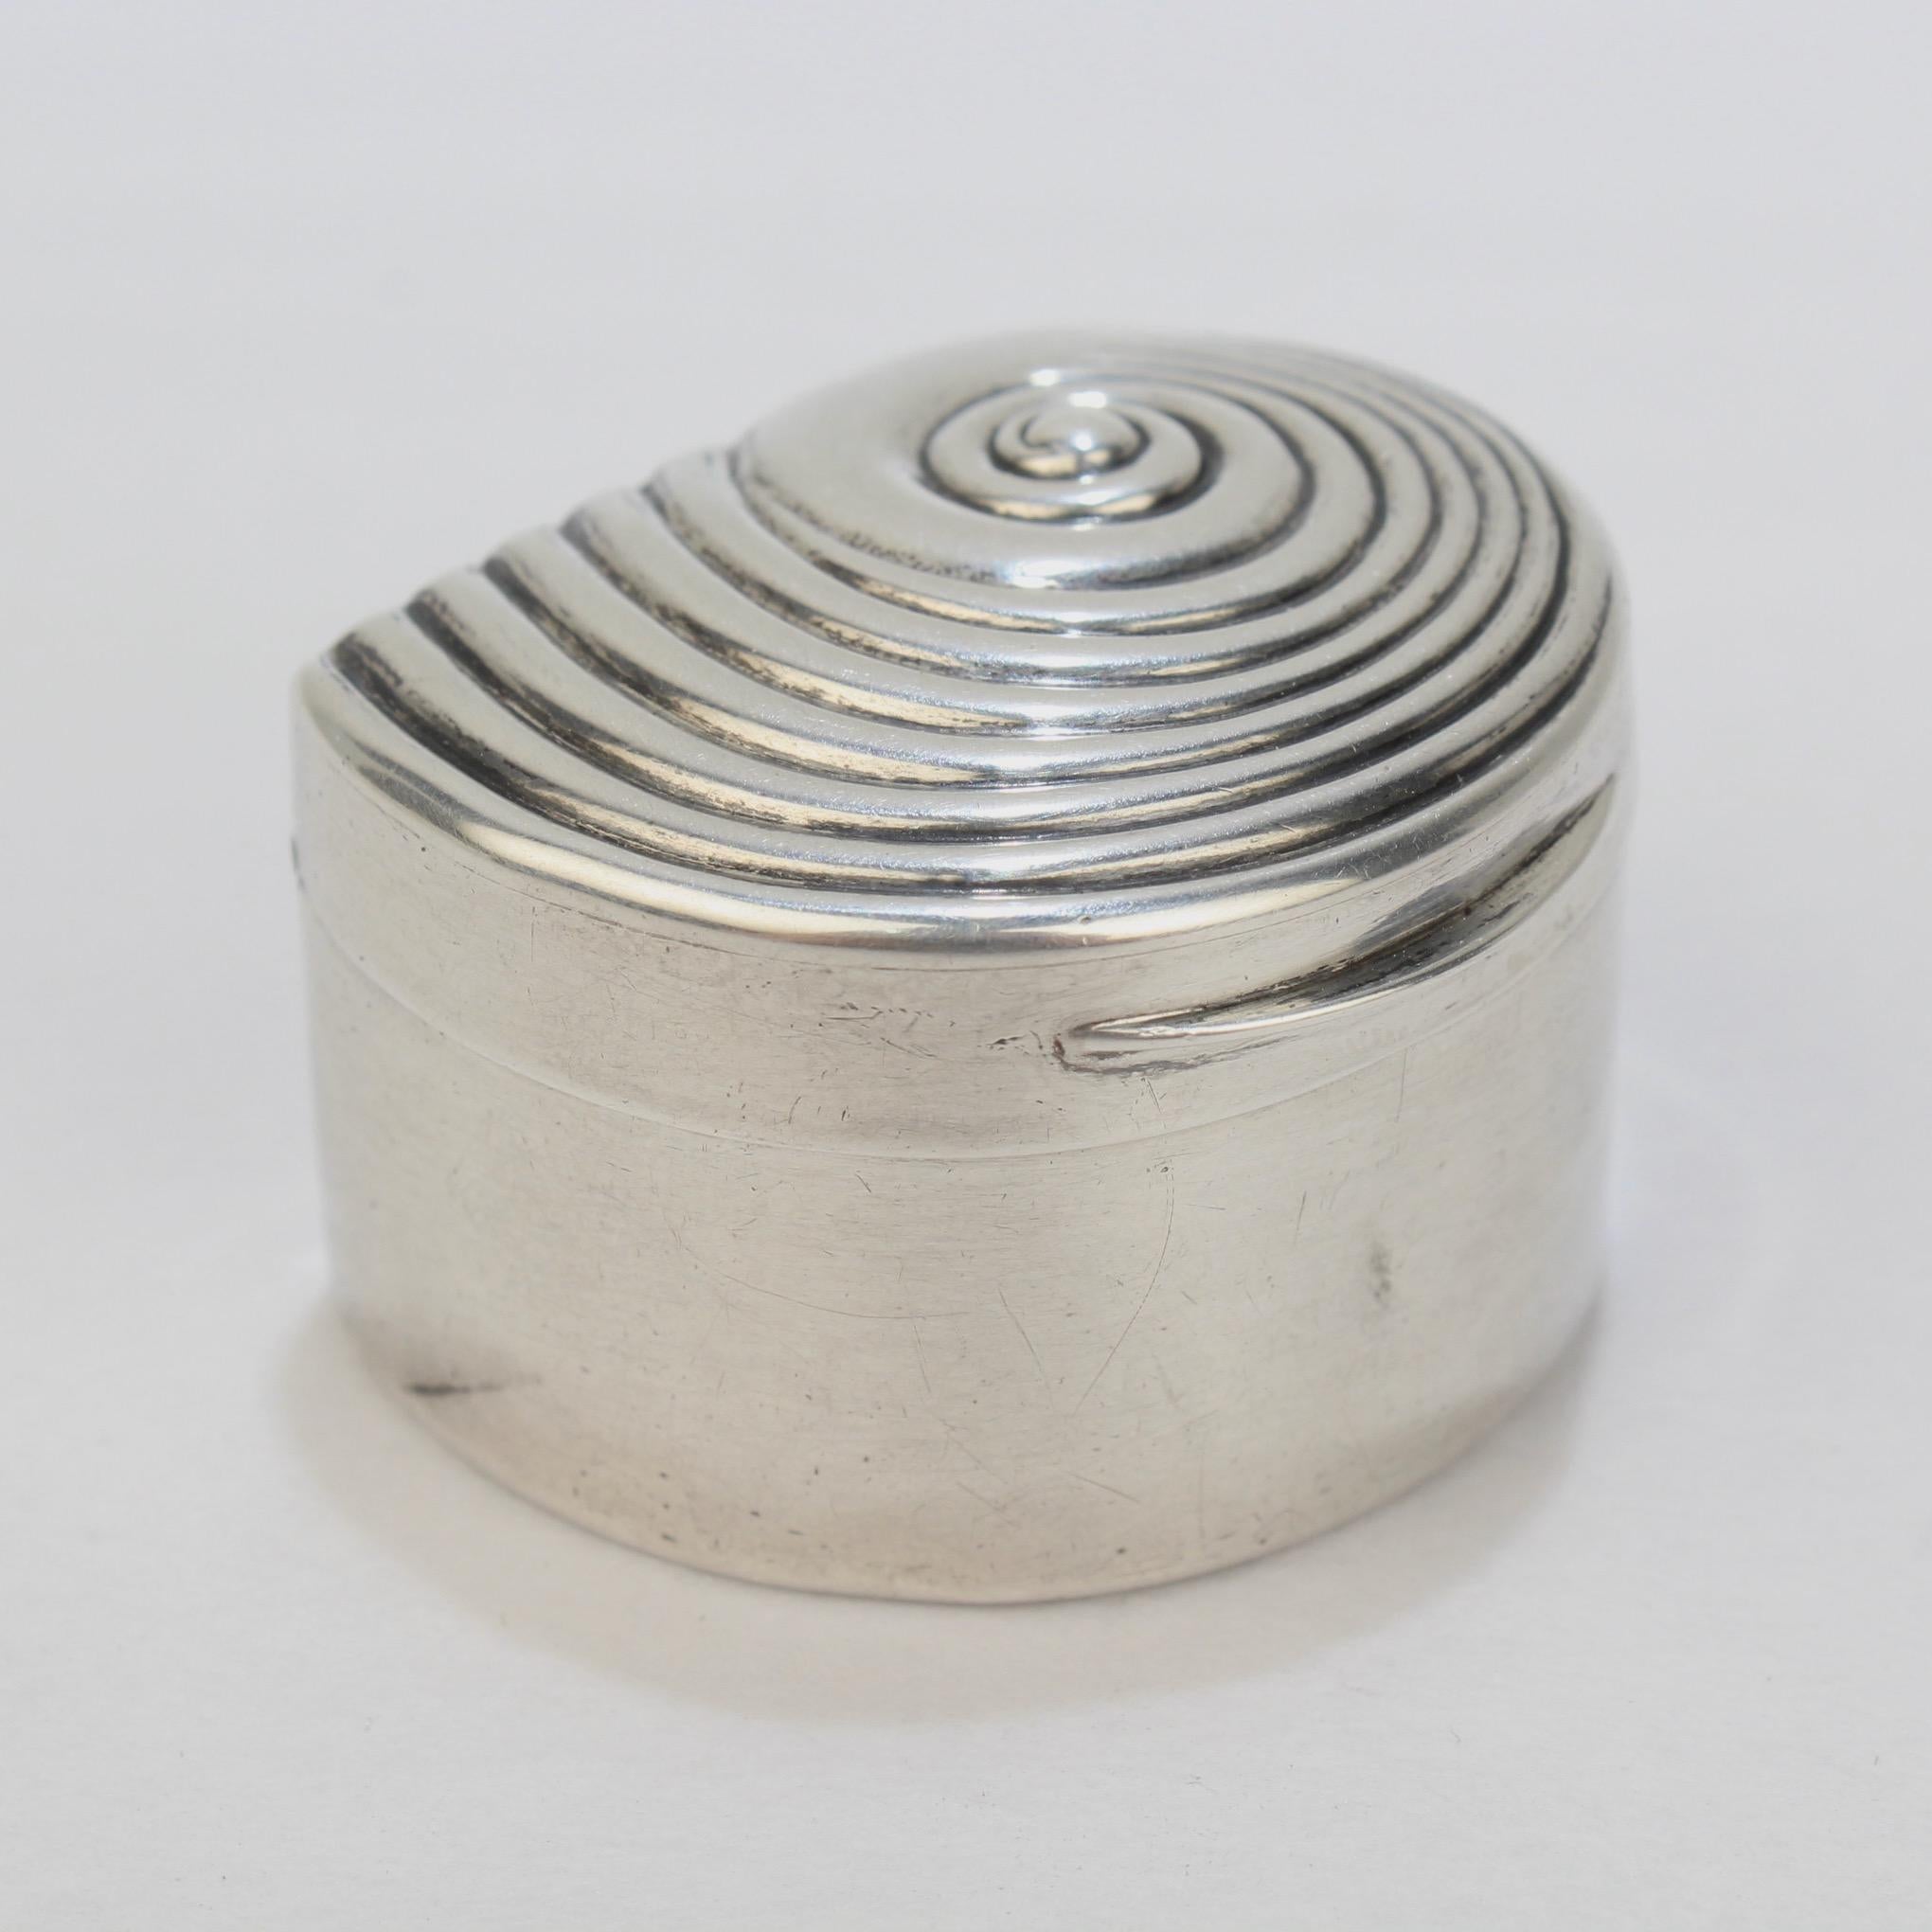 A fine and rare antique English Georgian sterling silver box.

In the rare figural form of a snail shell or seashell. The interior of the box is gilt.

It was made by Matthew Linwood II, who was a very fine Birmingham silversmith with a noted